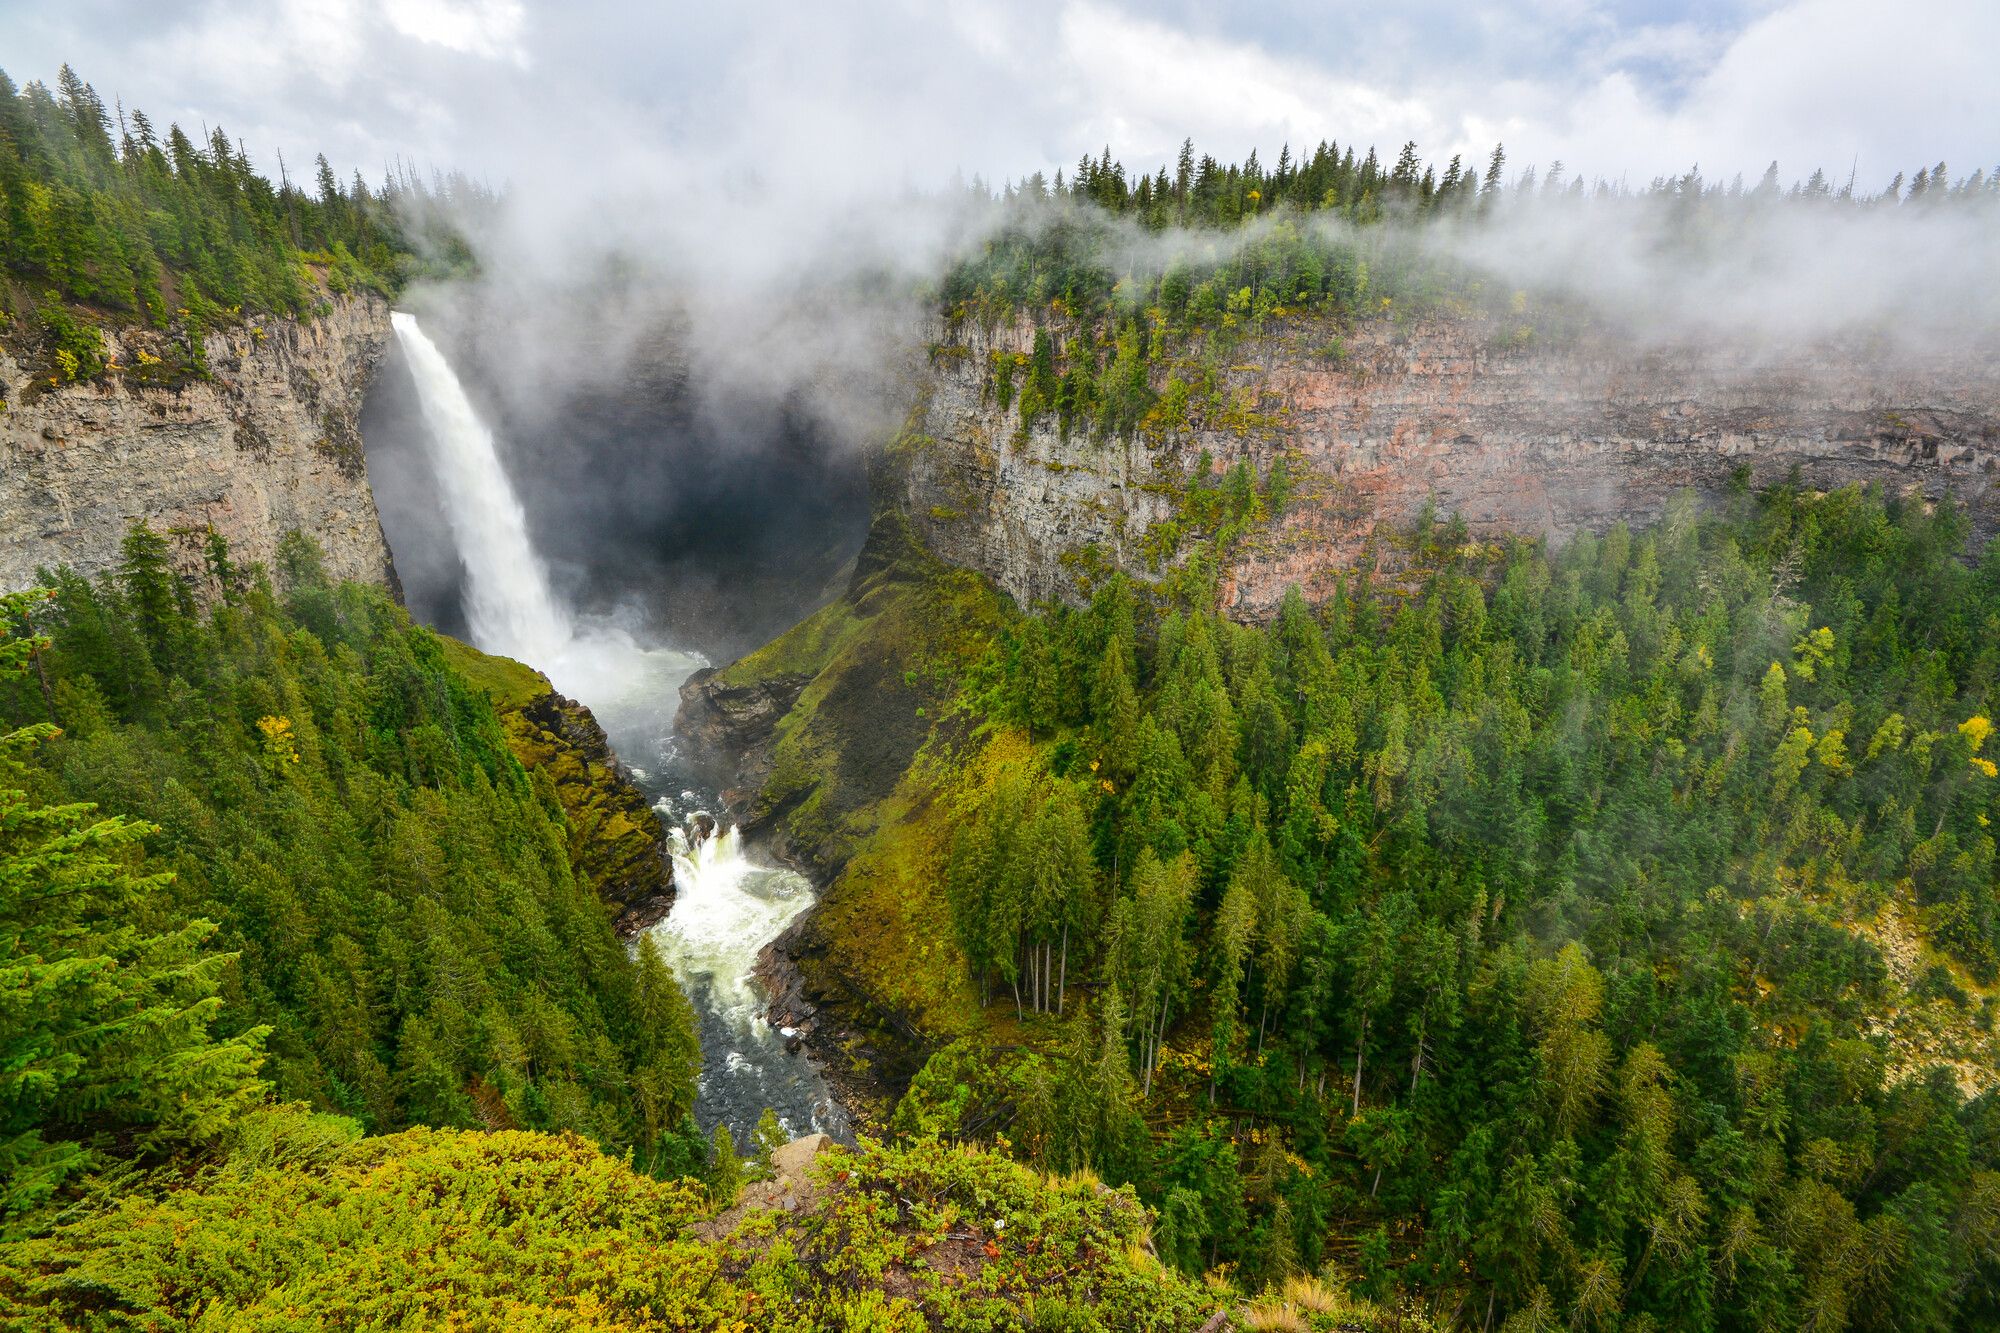 Murtle river is the source of Helmcken Falls. At a height of 141 meters, it is the 4th tallest waterfall in Canada and one of the park's most famous waterfalls. Wells Gray Park.